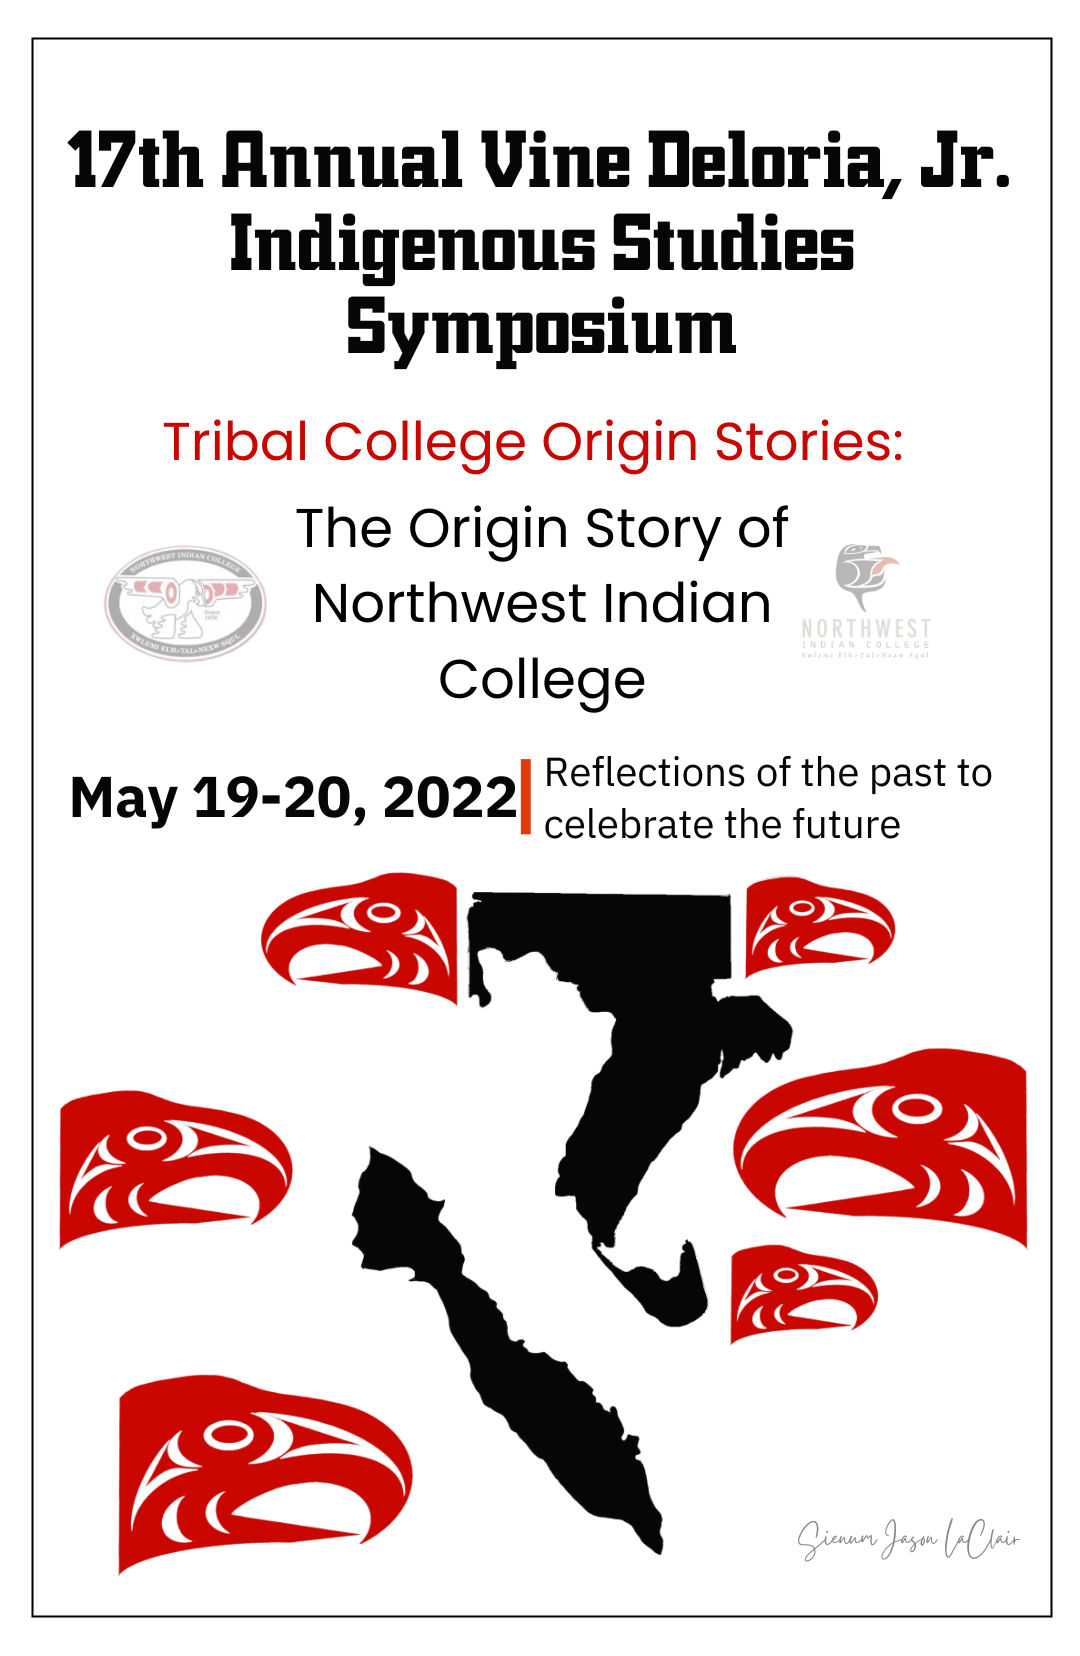 The artwork featured for the 17th Annual Vine Deloria, Jr. Indigenous Studies Symposium was created by Sienum (Jason LaClair) of Lummi Nation. The design represents this year’s theme, the Origin Story of Northwest Indian College. The design features the images of the Lummi Reservation and Lummi Island, which are significant to the NWIC origin story. The Lummi Reservation is the site of Lummi Day School and current NWIC, and Lummi Island was the site of the Lummi Indian School of Aquaculture. The red thunderheads surrounding the land images represent the six extended NWIC sites: Swinomish, Tulalip, Nisqually, Nez Perce, Port Gamble, and Muckleshoot. Sienum created this imagery following the clean lines used in the Coast Salish art style.